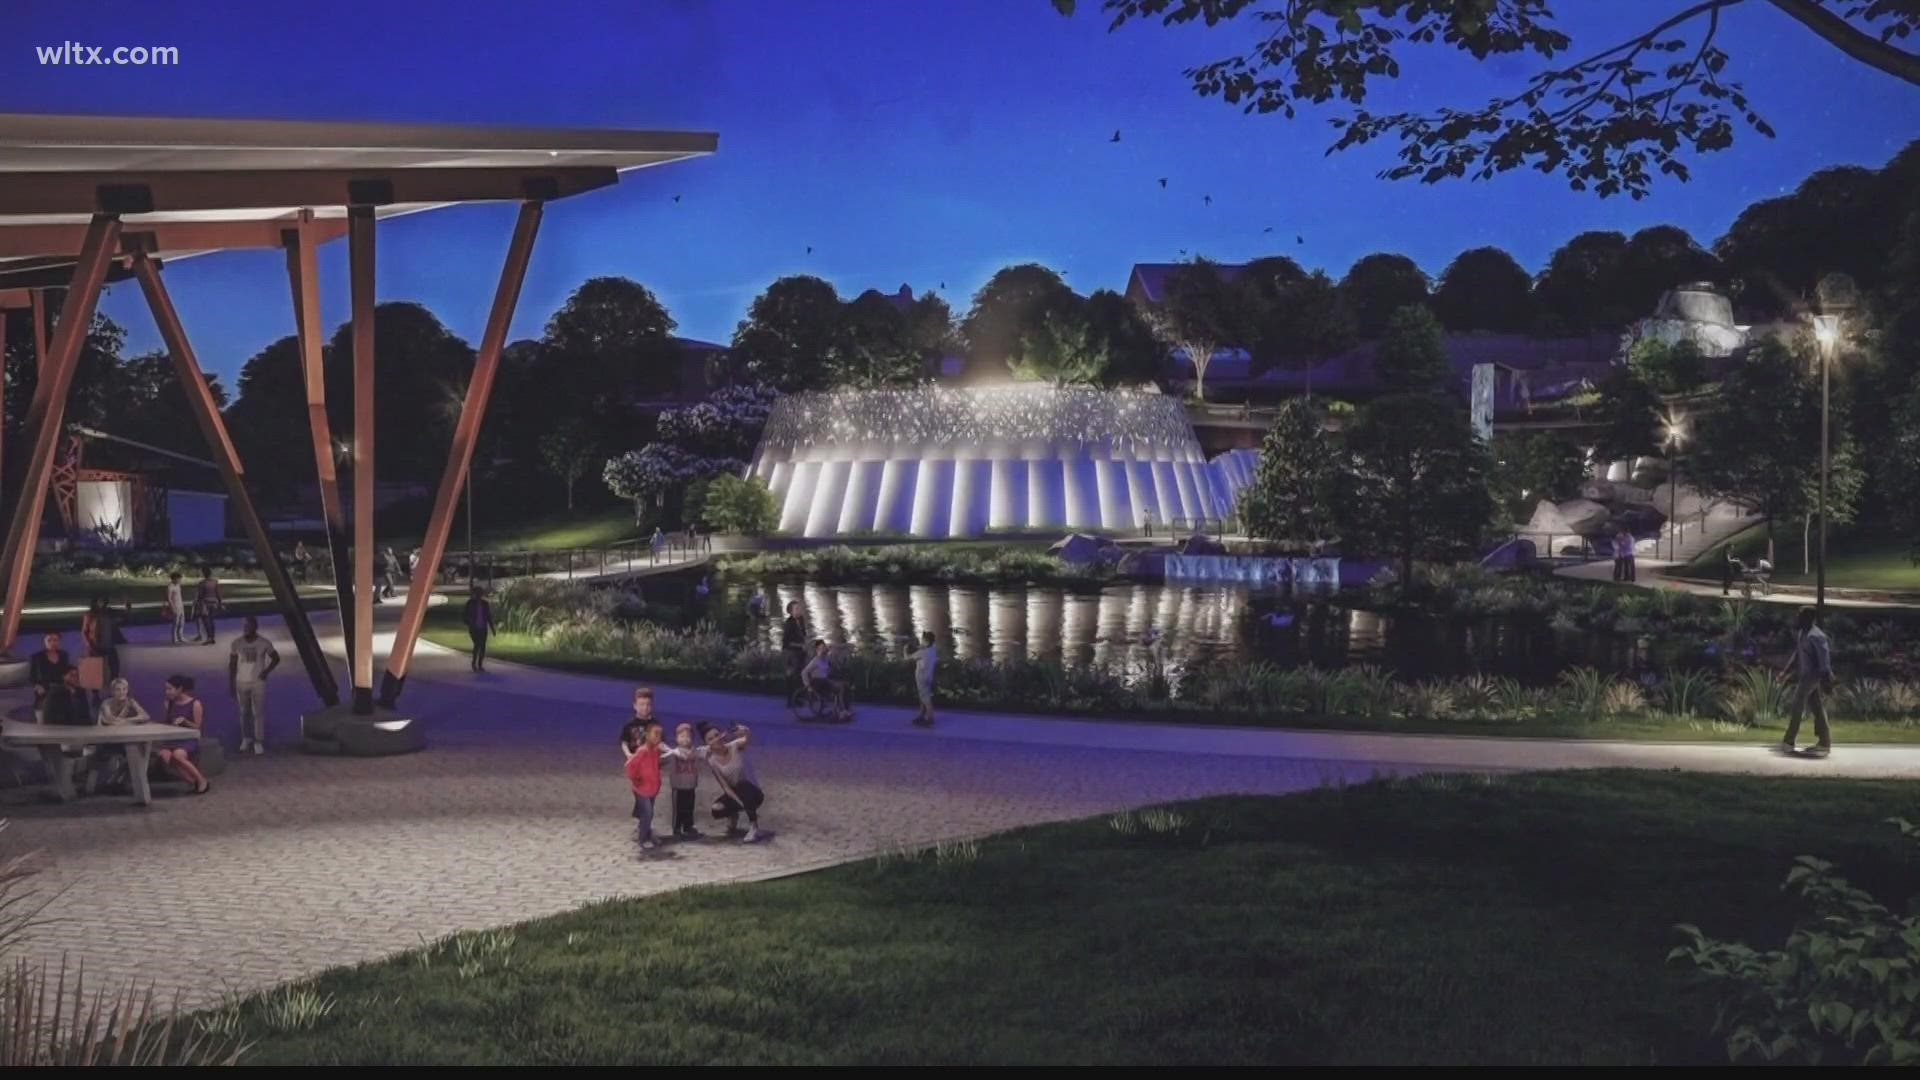 The city is looking to breathe new life into Findlay Park.